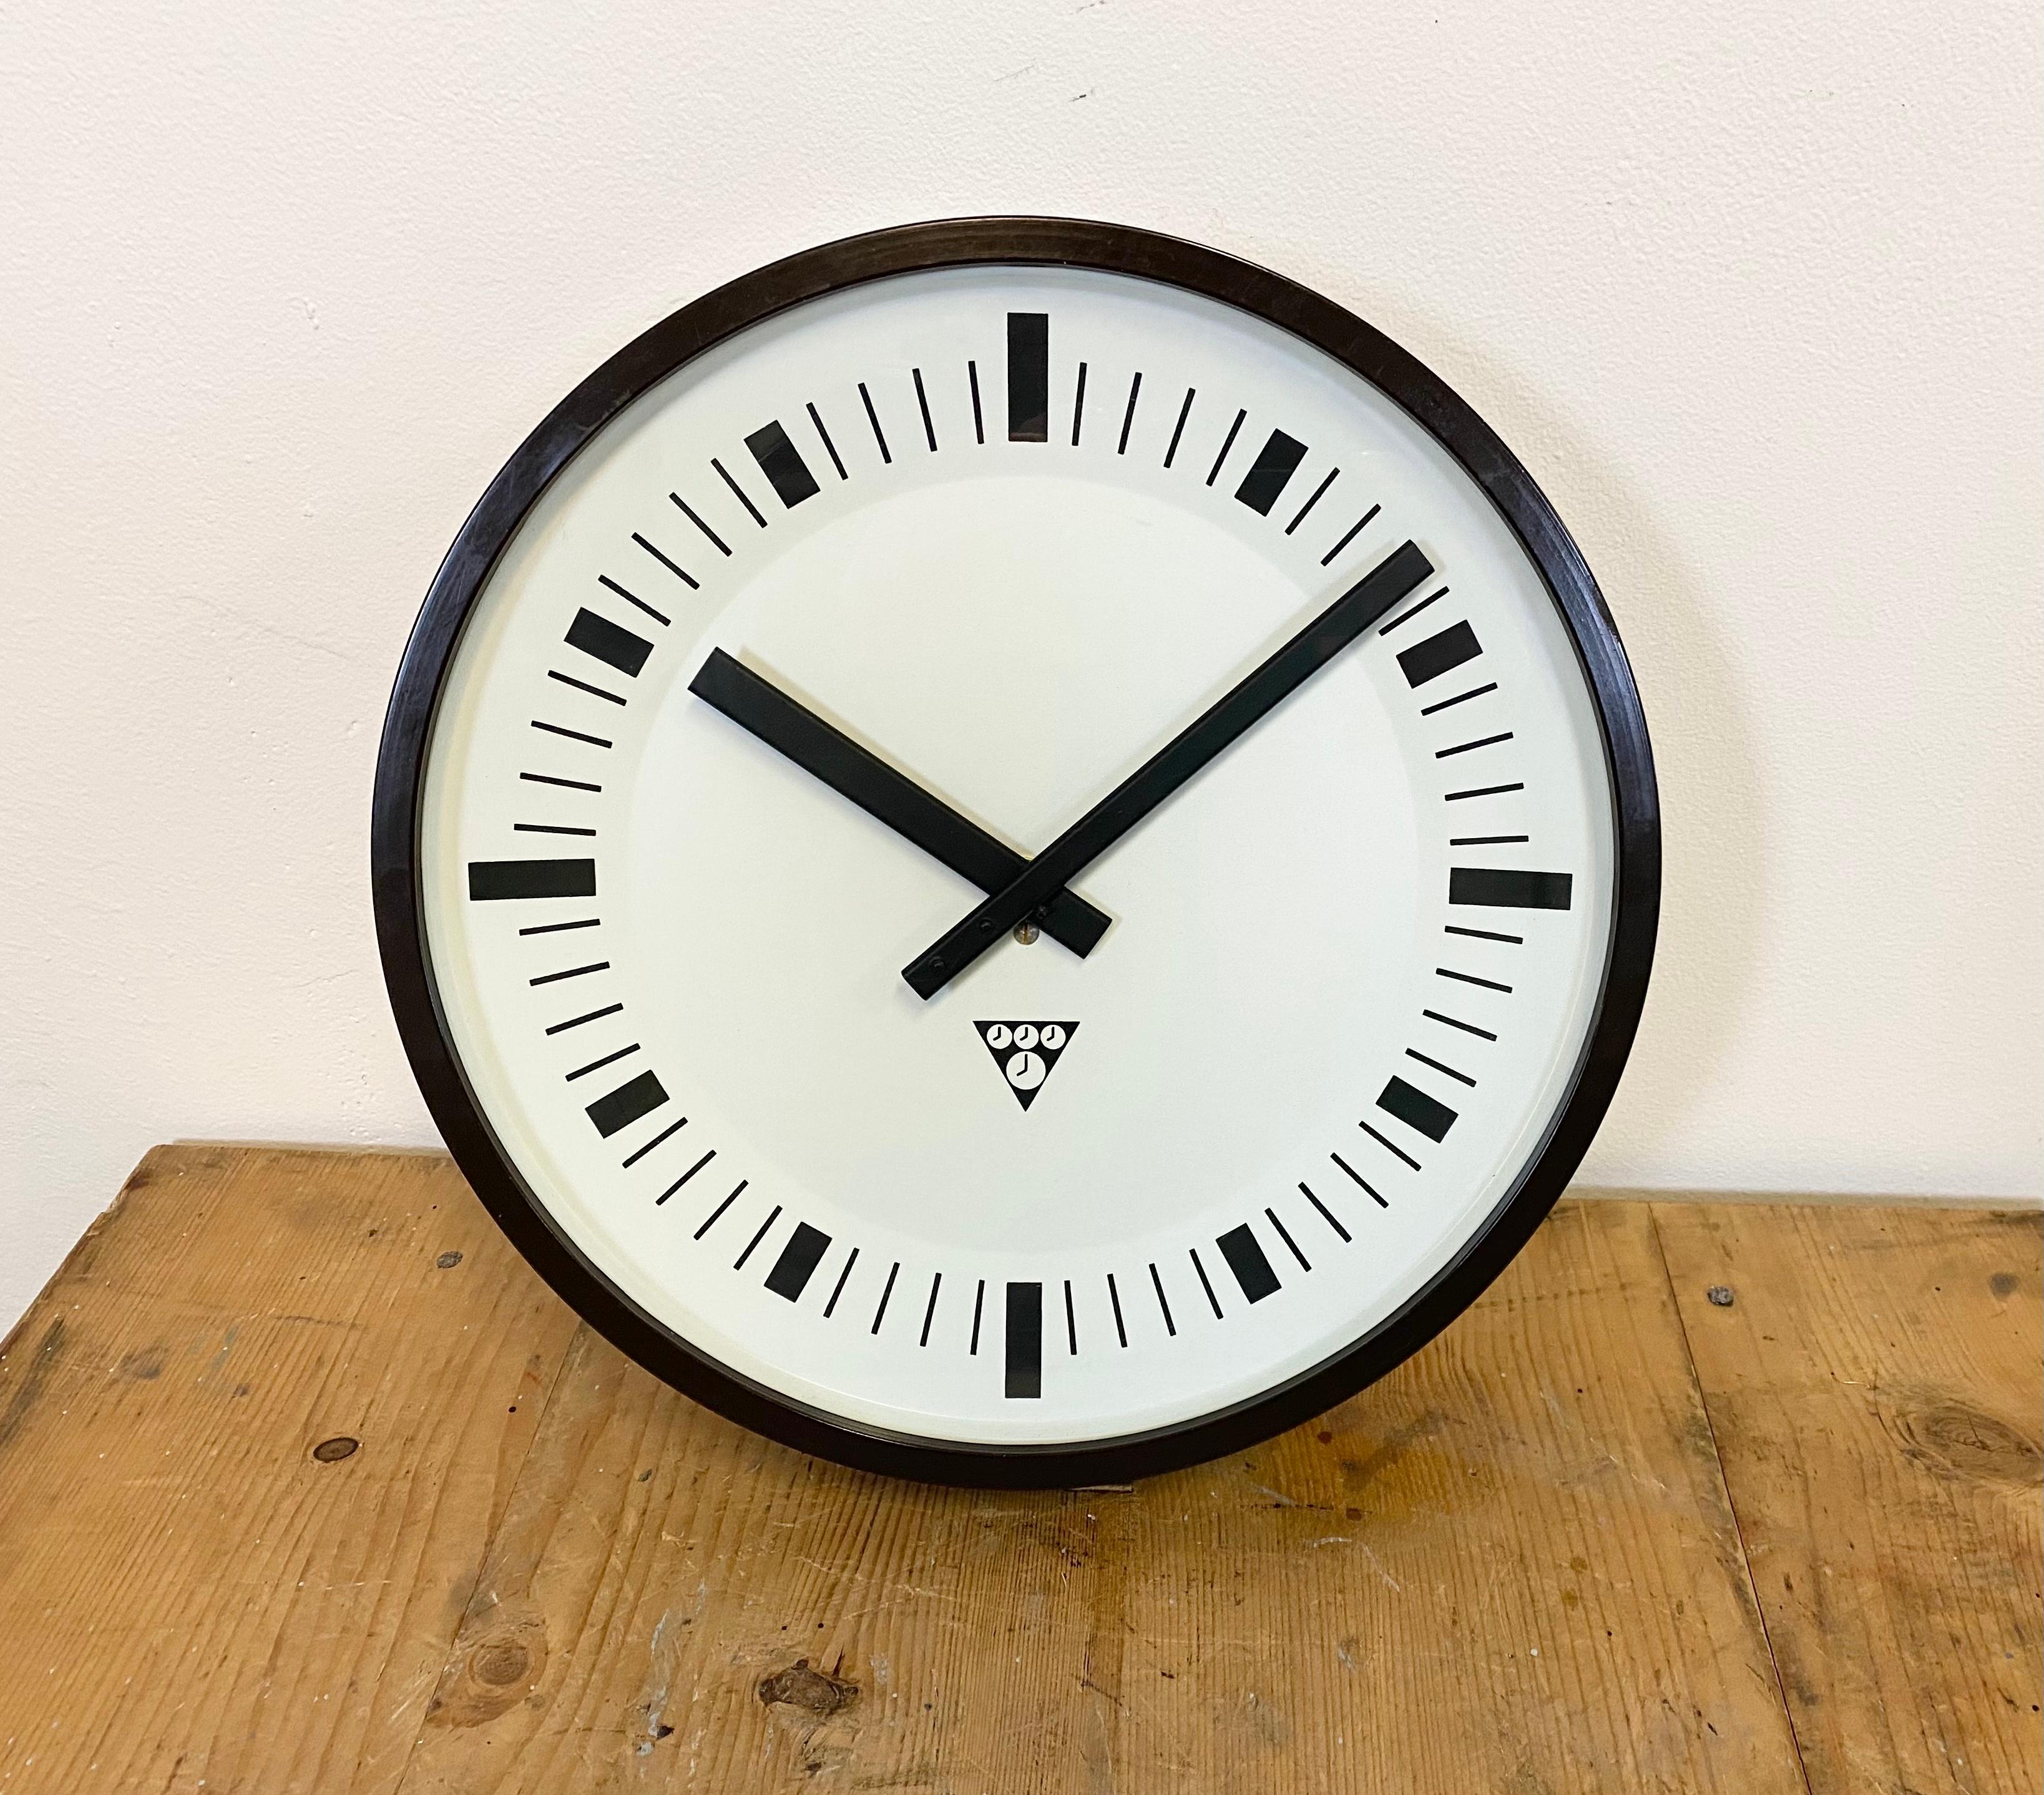 This wall clock was designed by Pragotron in former Czechoslovakia during the 1970s. The piece features a brown bakelite frame, aluminium dial and clear glass cover. The piece has been converted into a battery-powered clockwork and requires only one